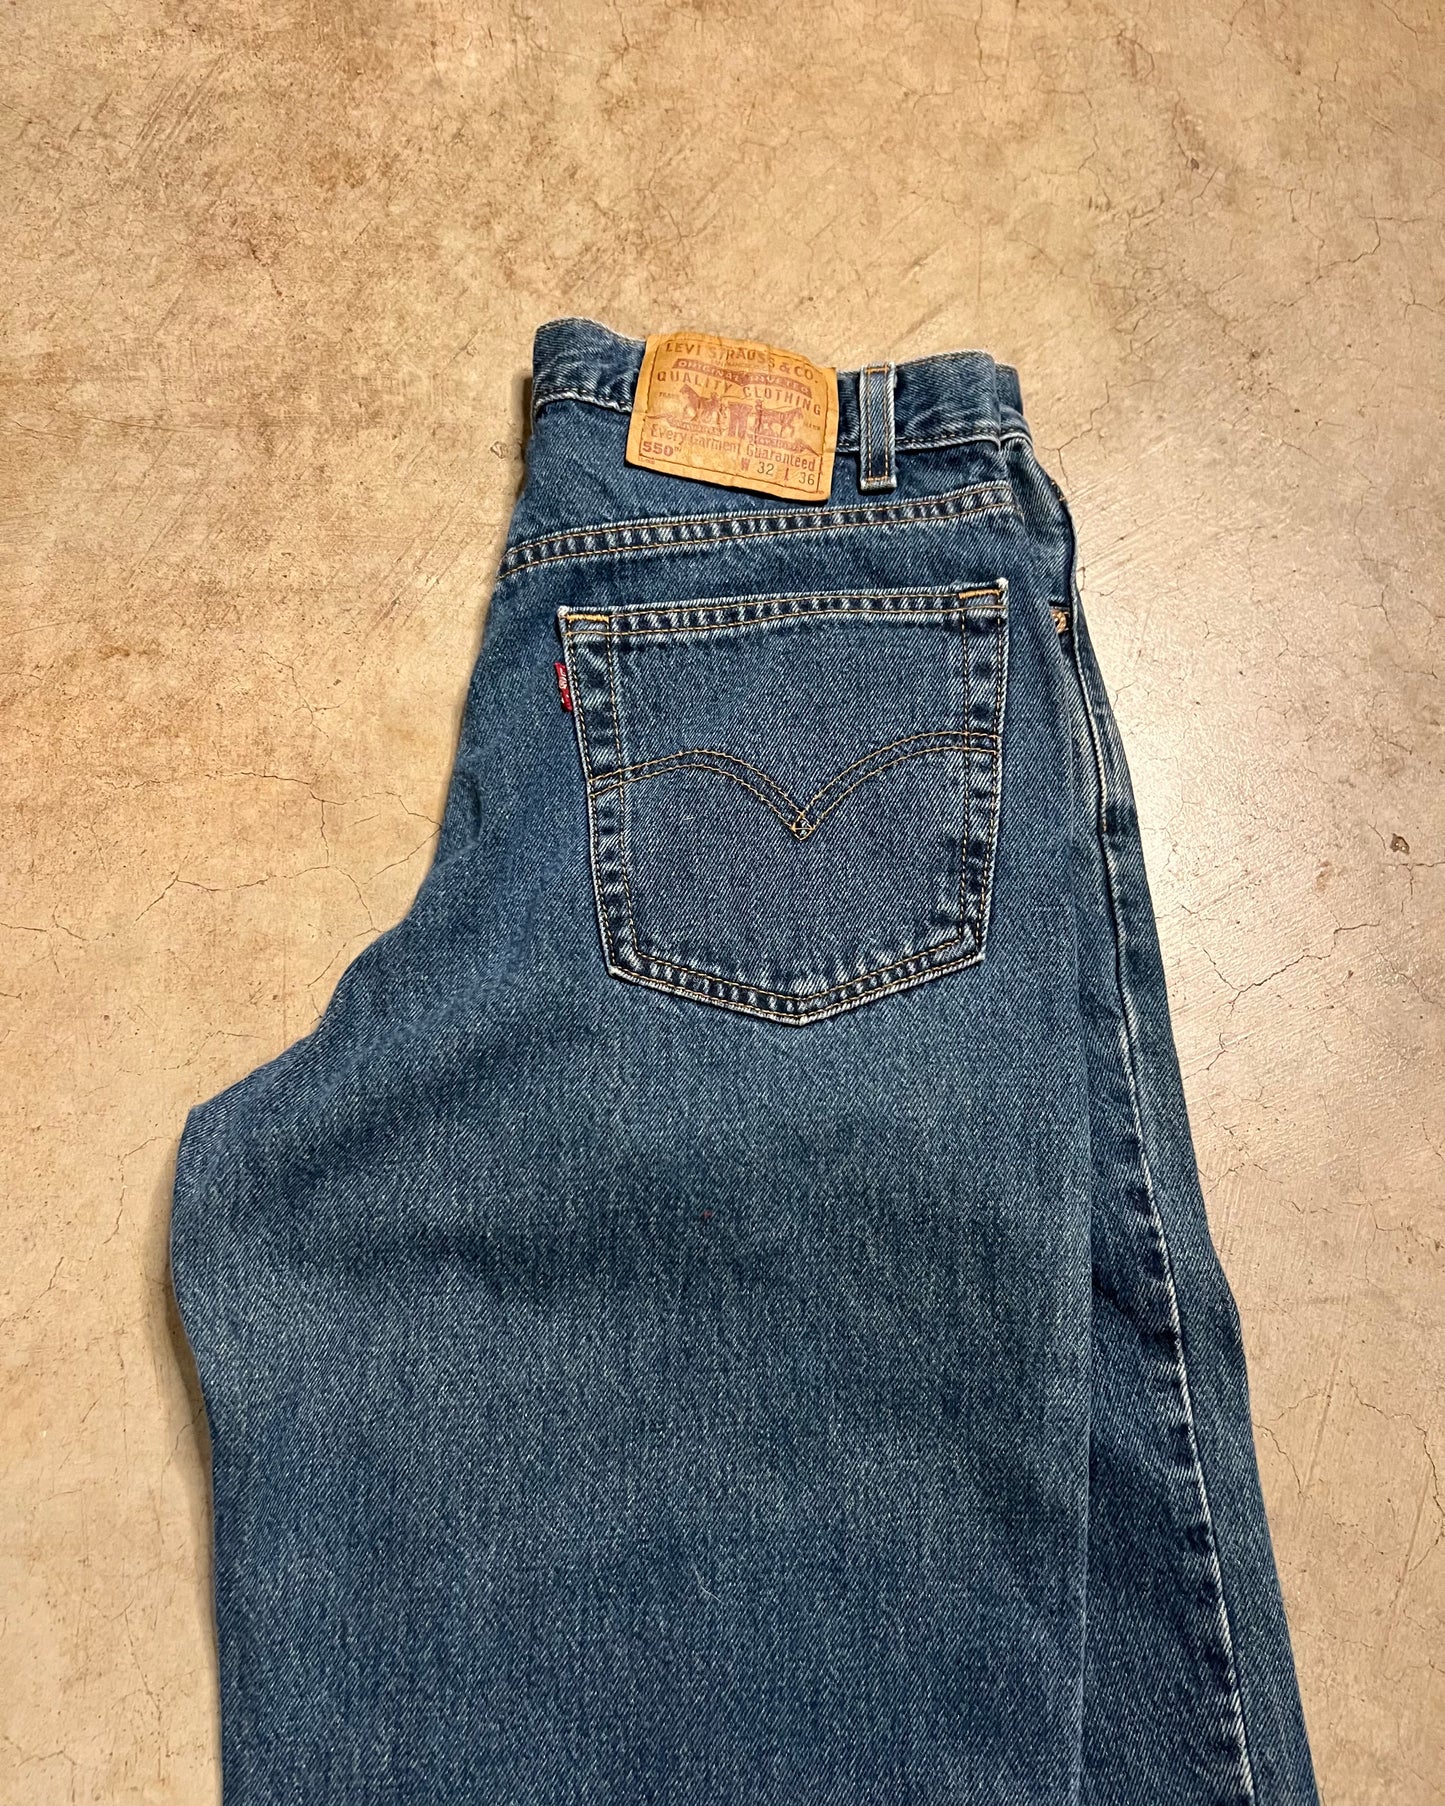 1990's Levis 550 Relaxed Fit Jeans